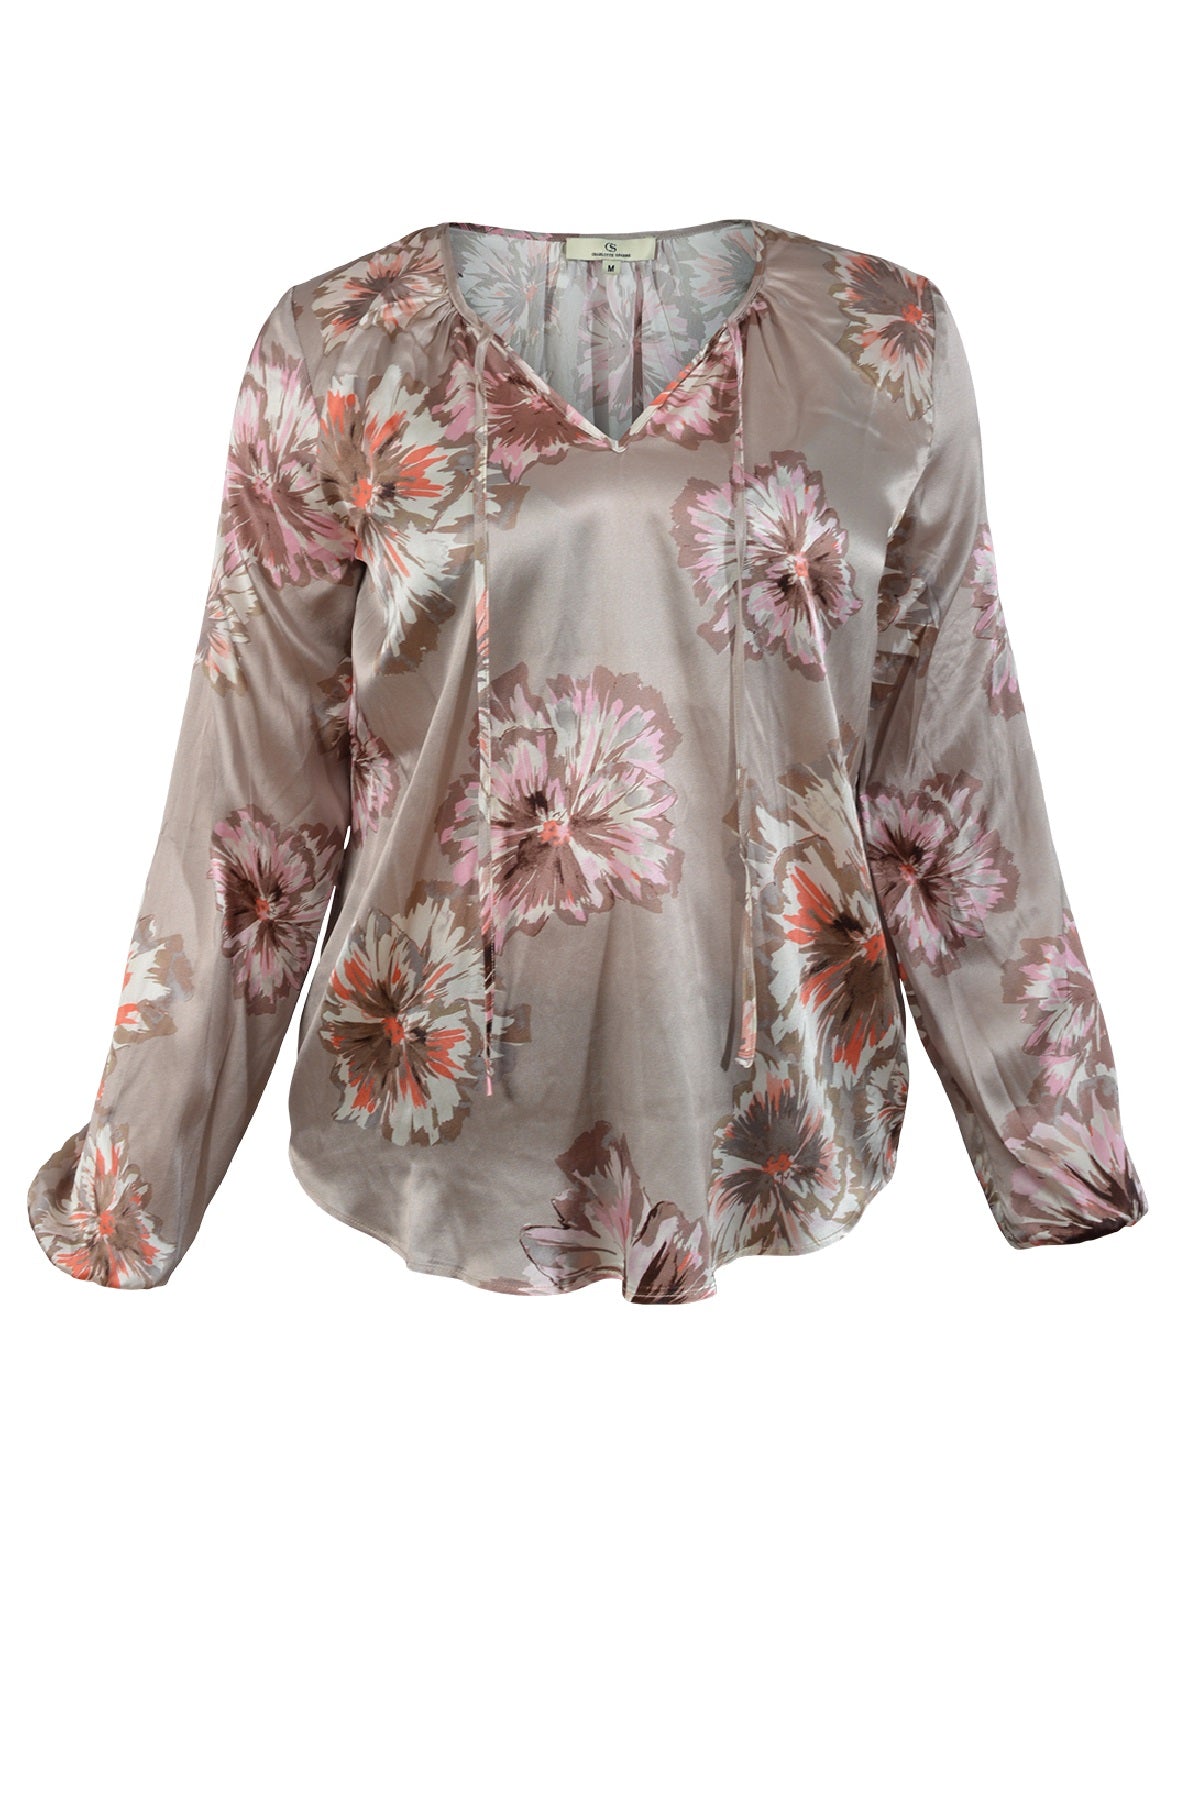 Charlotte Sparre  String Shirt 2913, Lively Taupe